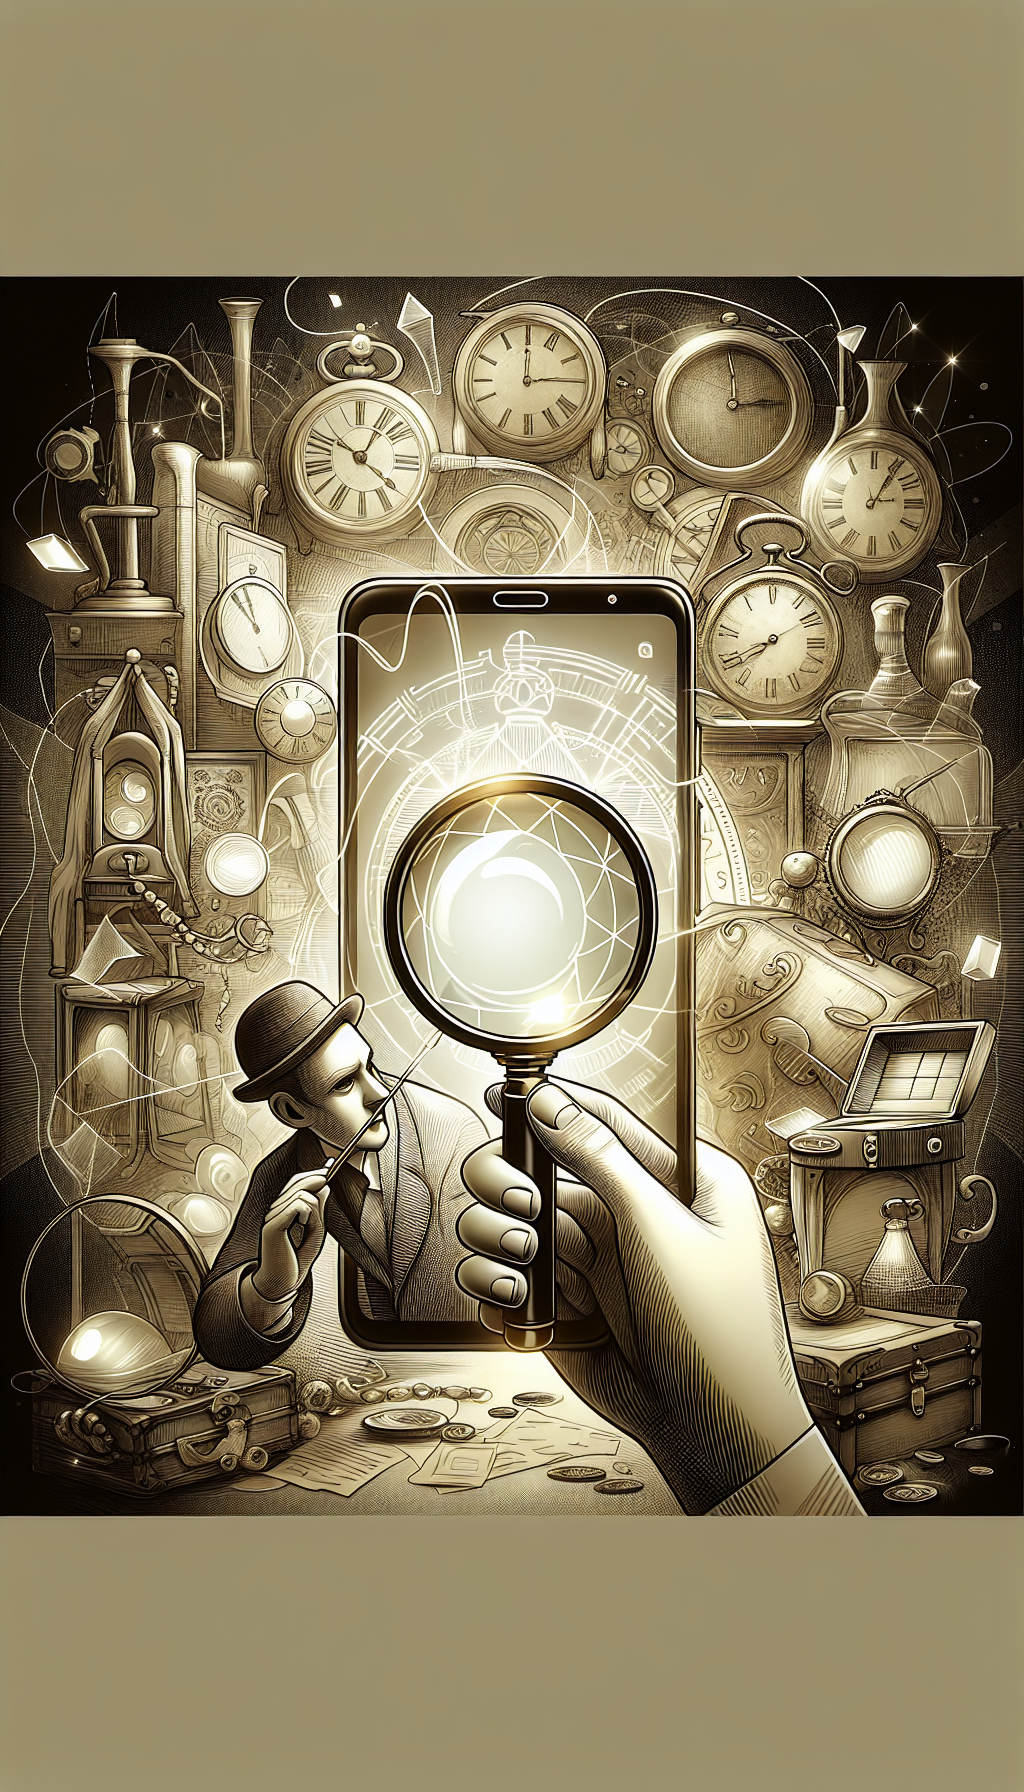 A curious character holds a magnifying glass over a classic smartphone screen, which magnifies an app icon featuring a shimmering treasure chest. Surrounding the phone, ghostly digital silhouettes of antique objects—clocks, vases, jewelry—glow softly, hinting at their hidden value. The illustration blends vintage line art with sleek modern graphics, symbolizing the fusion of past treasures with contemporary technology.